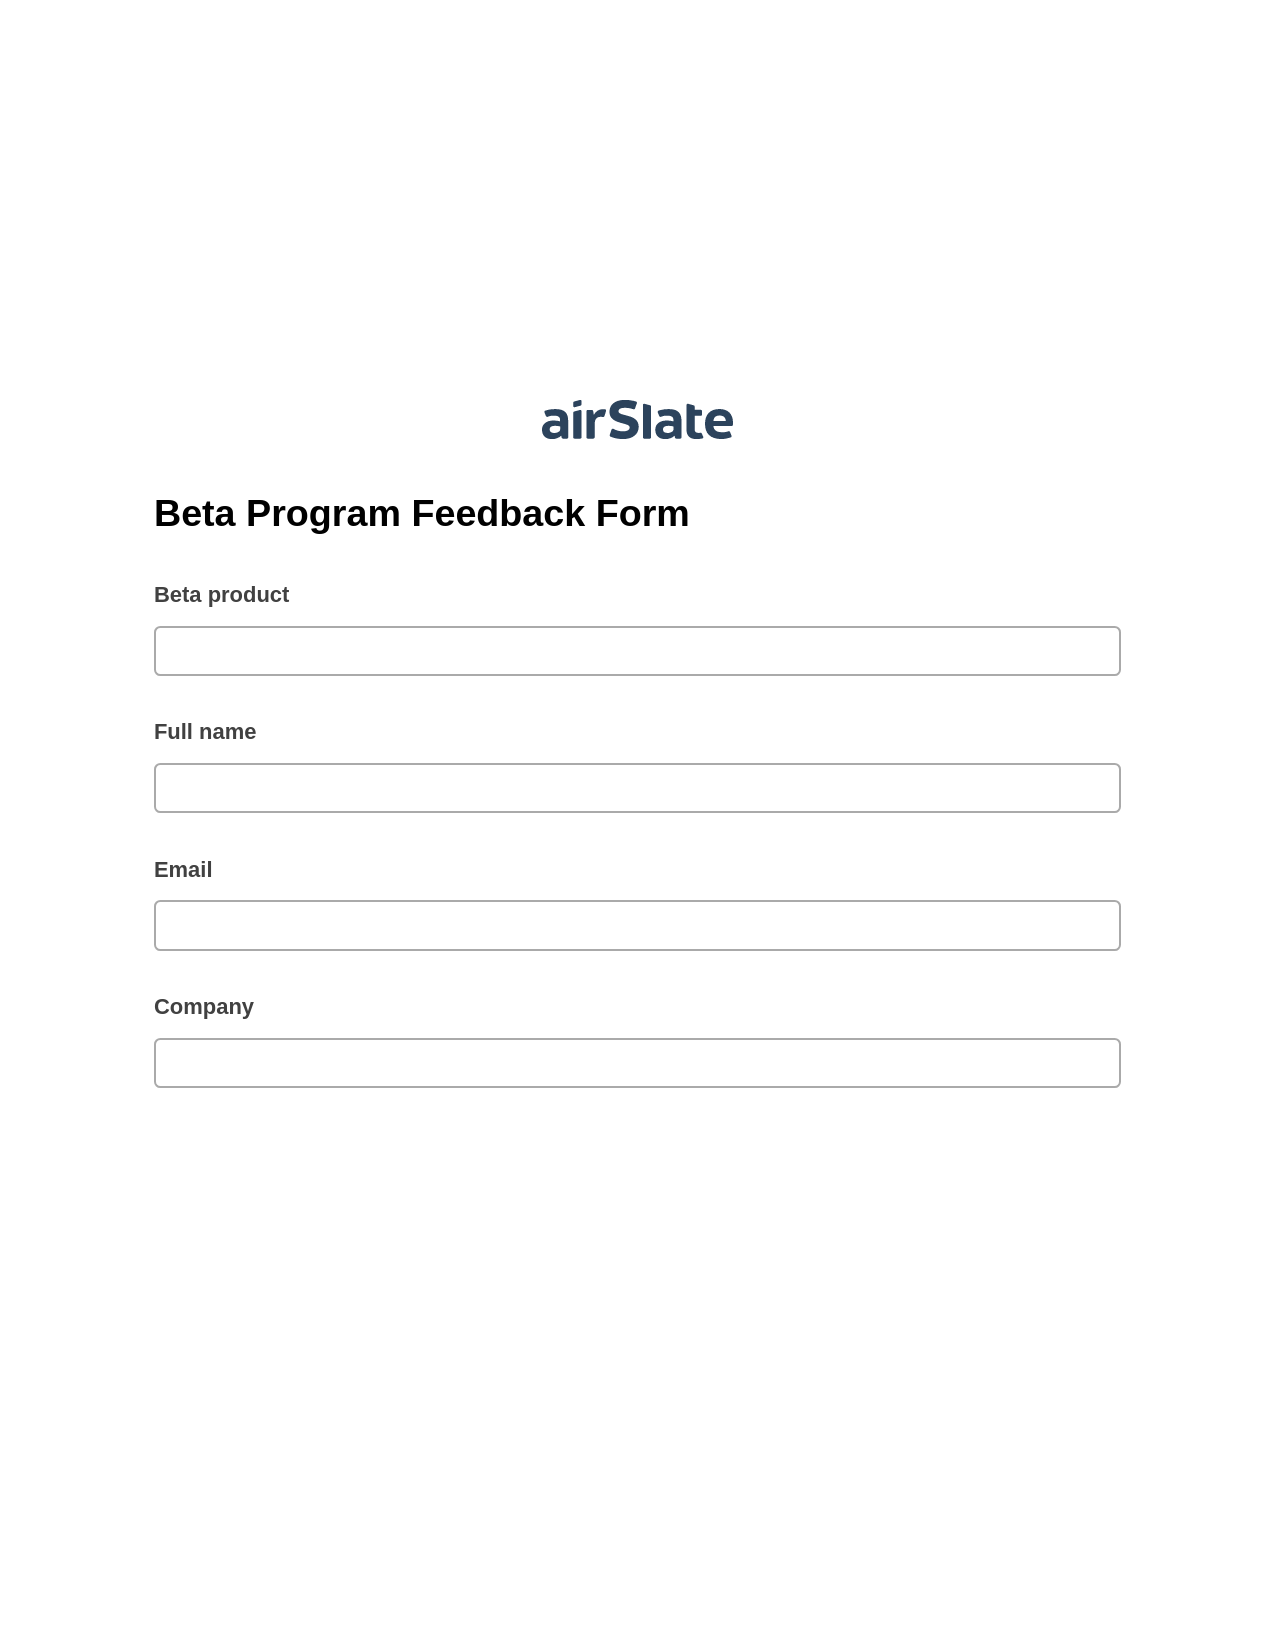 Multirole Beta Program Feedback Form Pre-fill Dropdown from Airtable, Email Notification Bot, Export to Excel 365 Bot